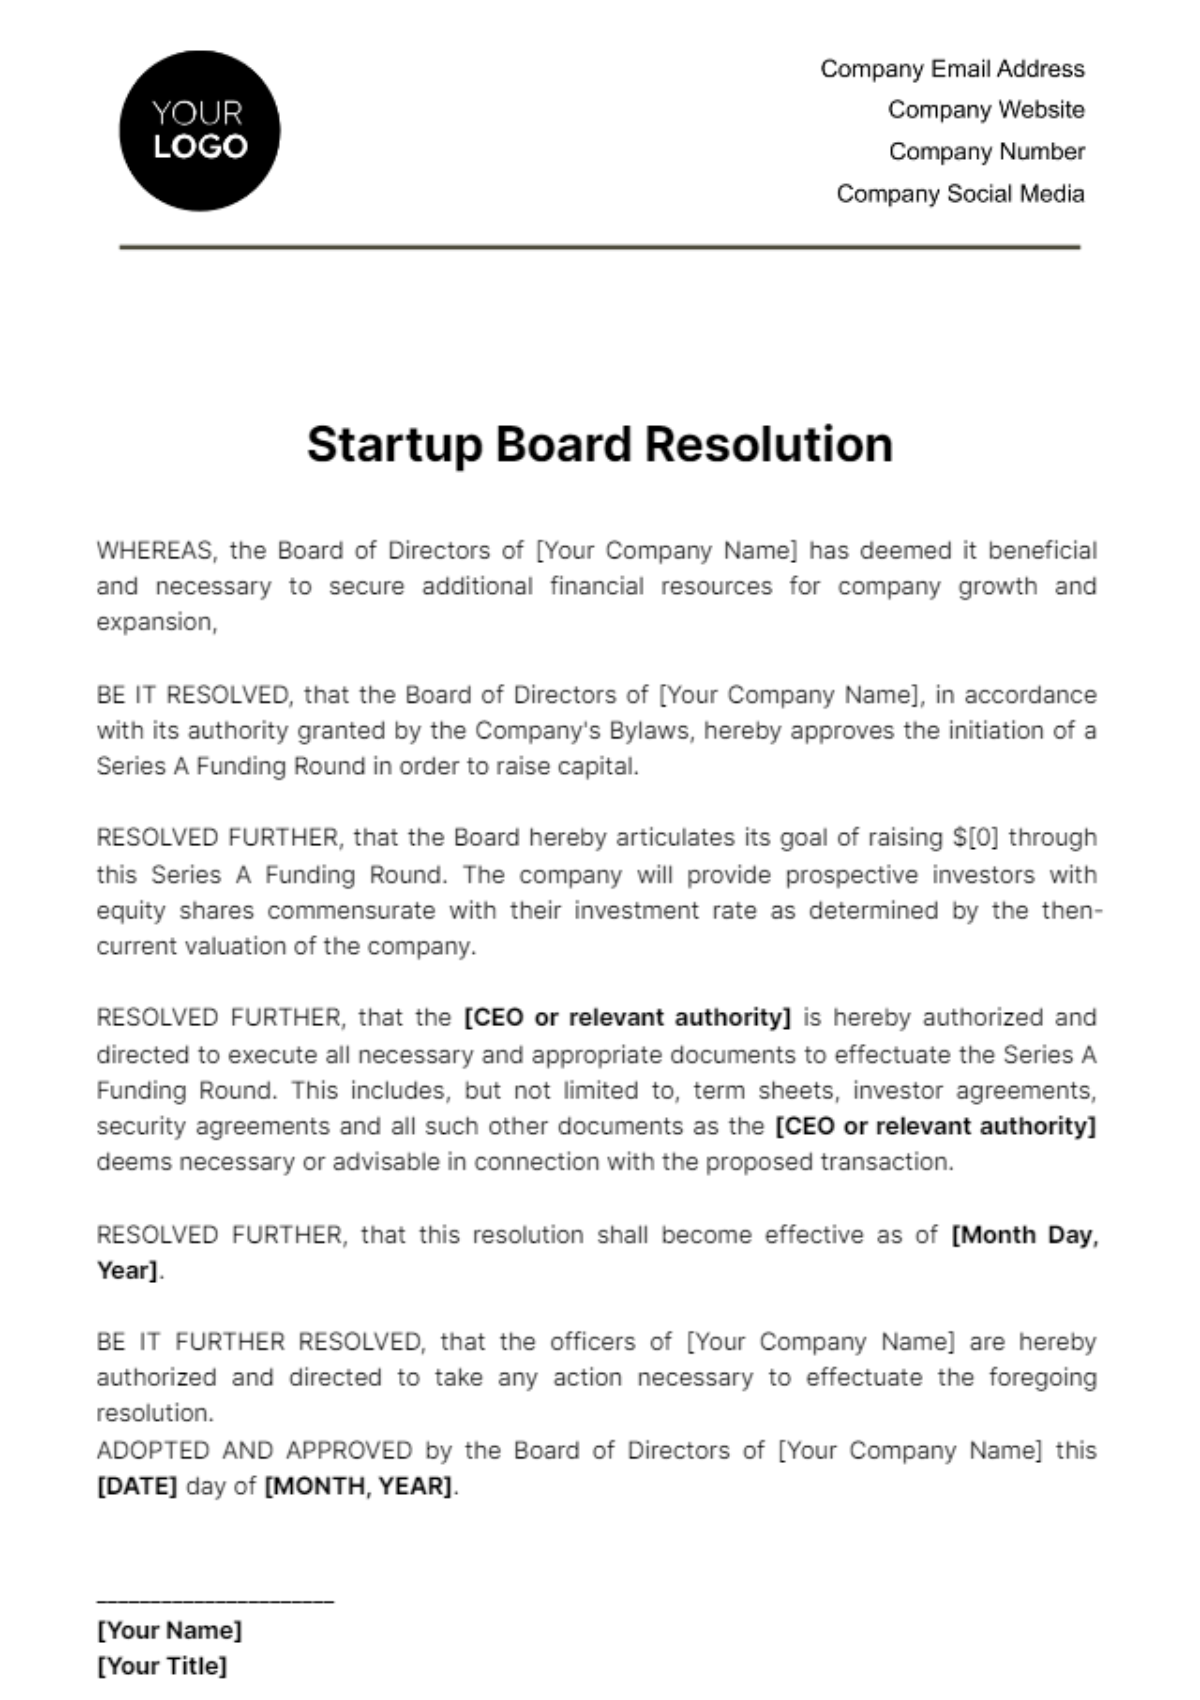 Free Startup Board Resolution Template